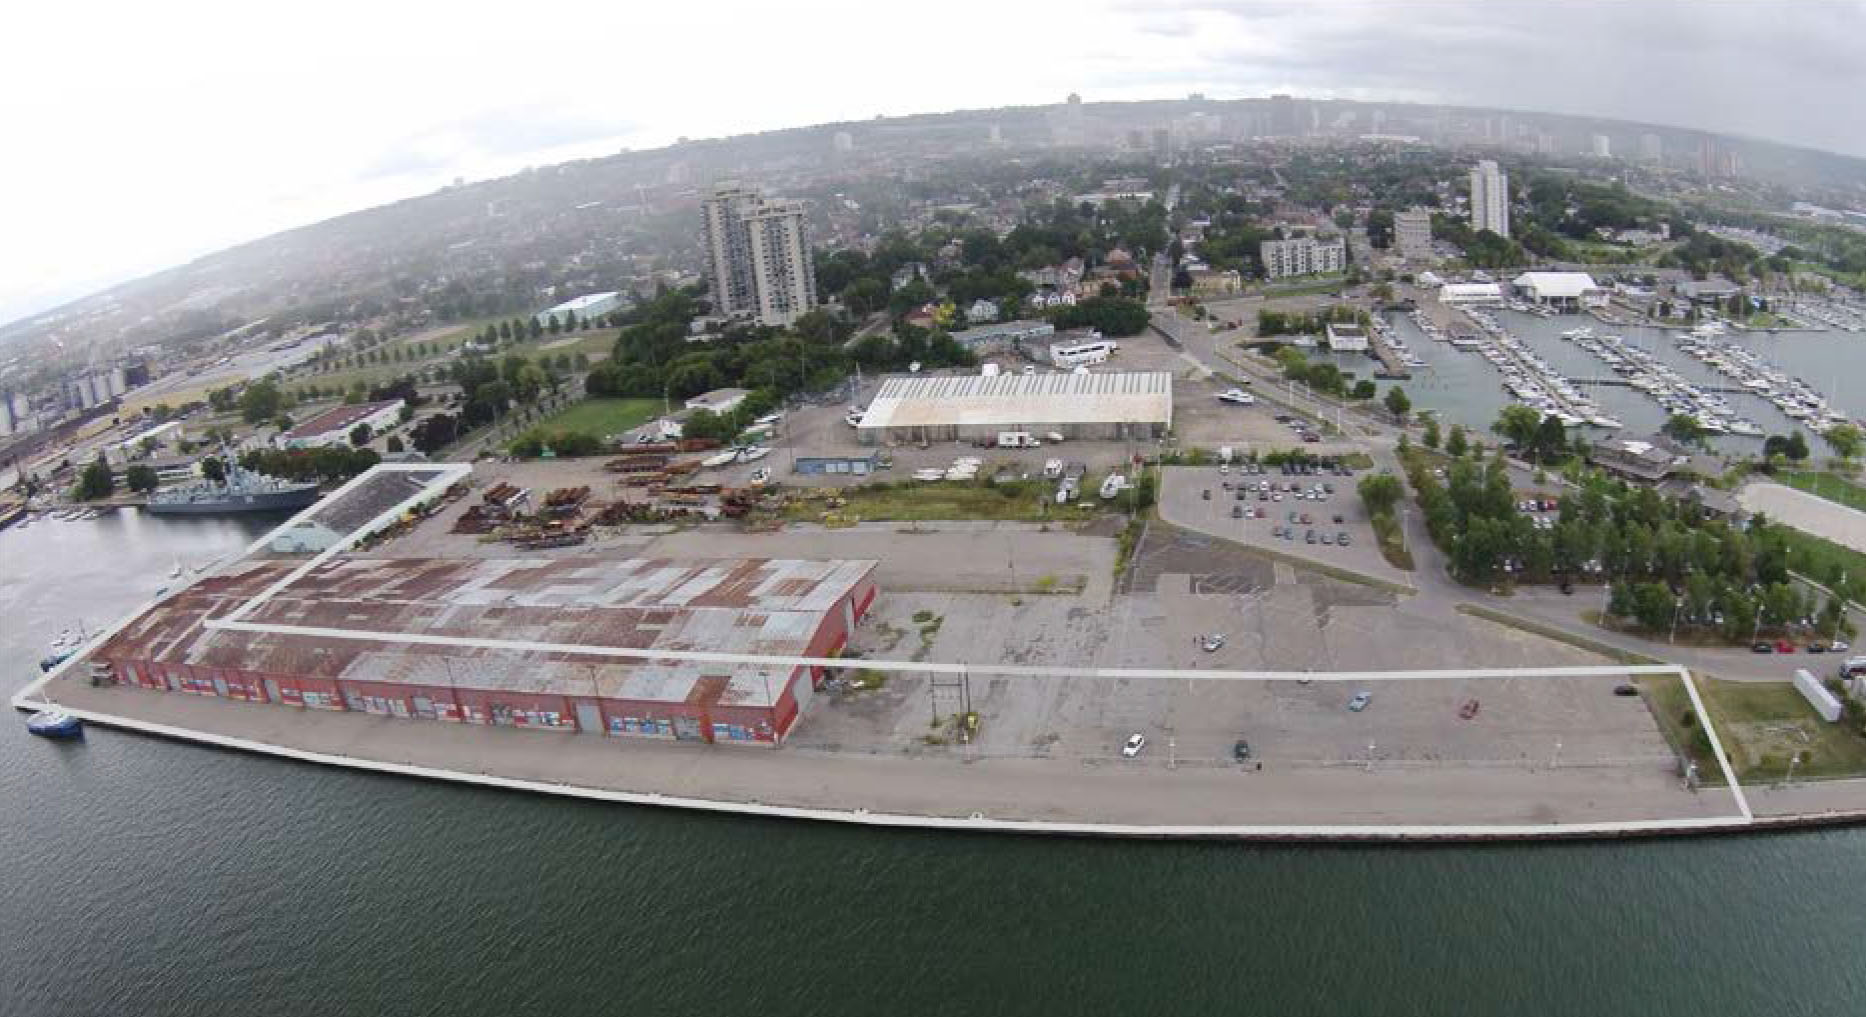 MBTW Shortlisted to Participate in the Hamilton Pier 8 Promenade Park Design Competition